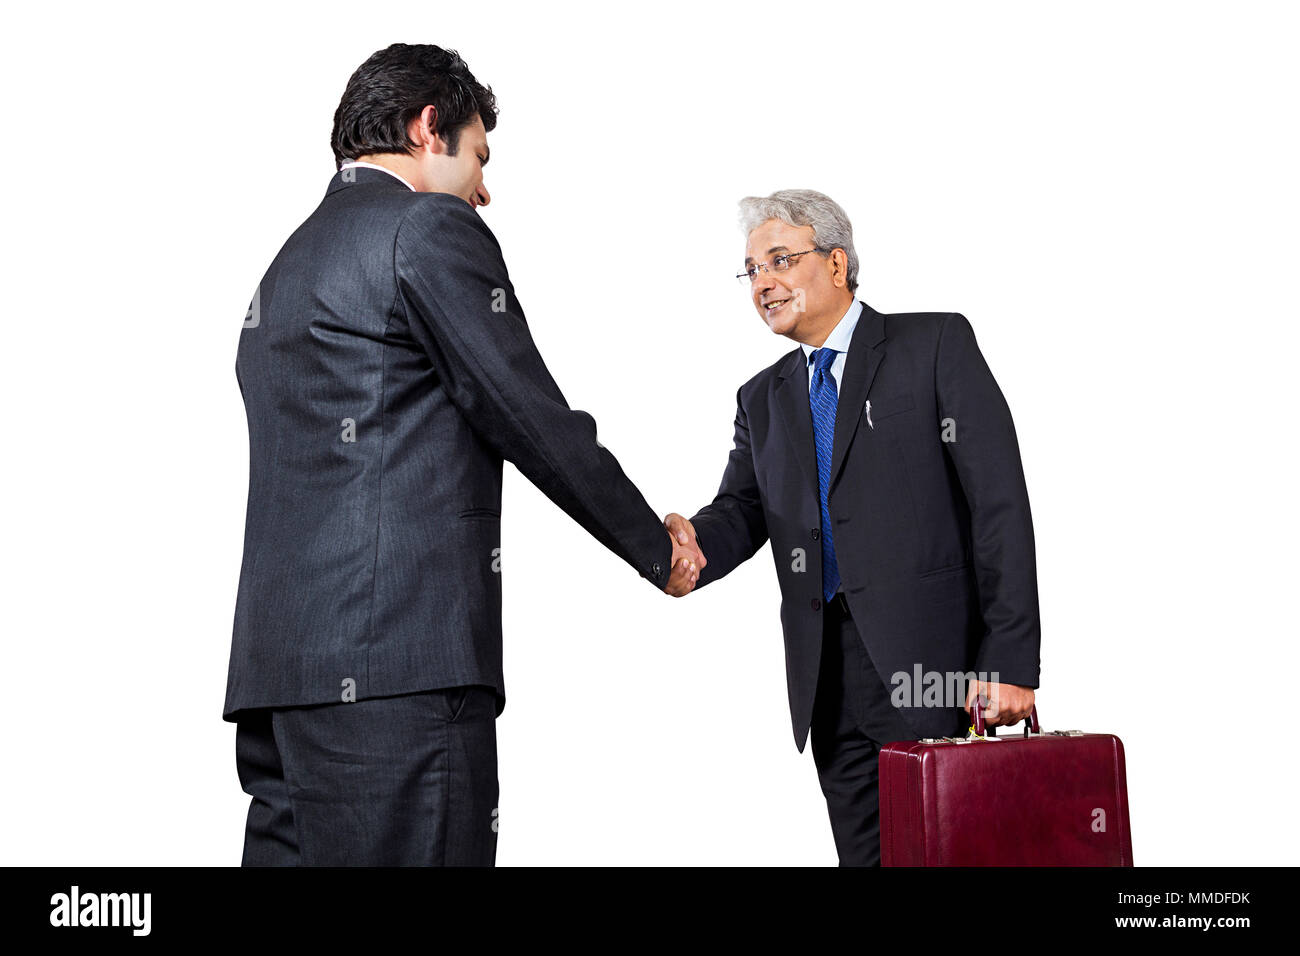 Two Businessmen with briefcases Handshaking on white Background Stock Photo